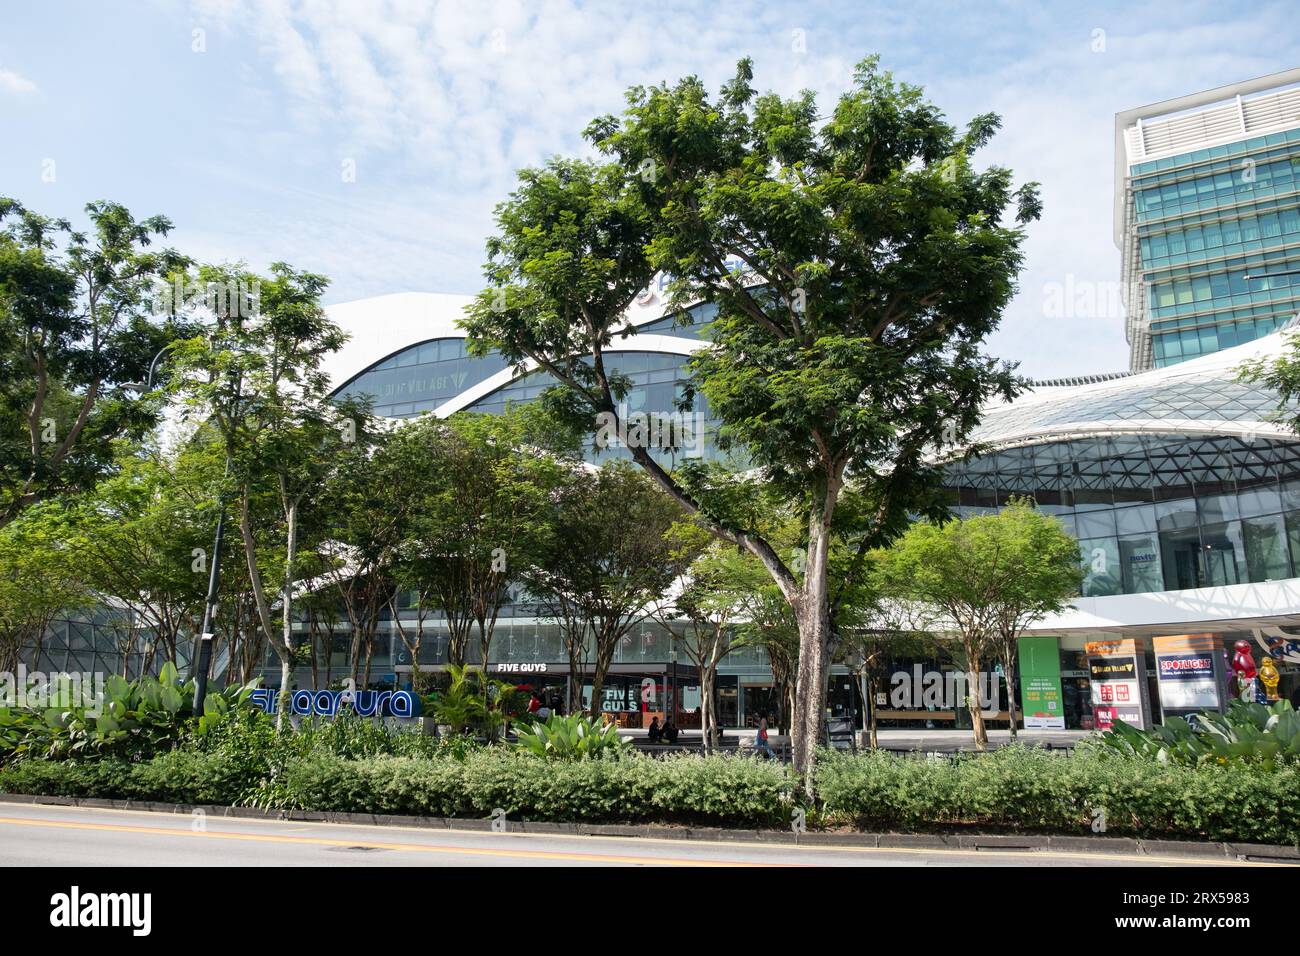 Singapore - 20 October 2022: Plaza Singapura. It is a contemporary shopping mall located along Orchard Road, Singapore, next to Dhoby Ghaut MRT statio Stock Photo